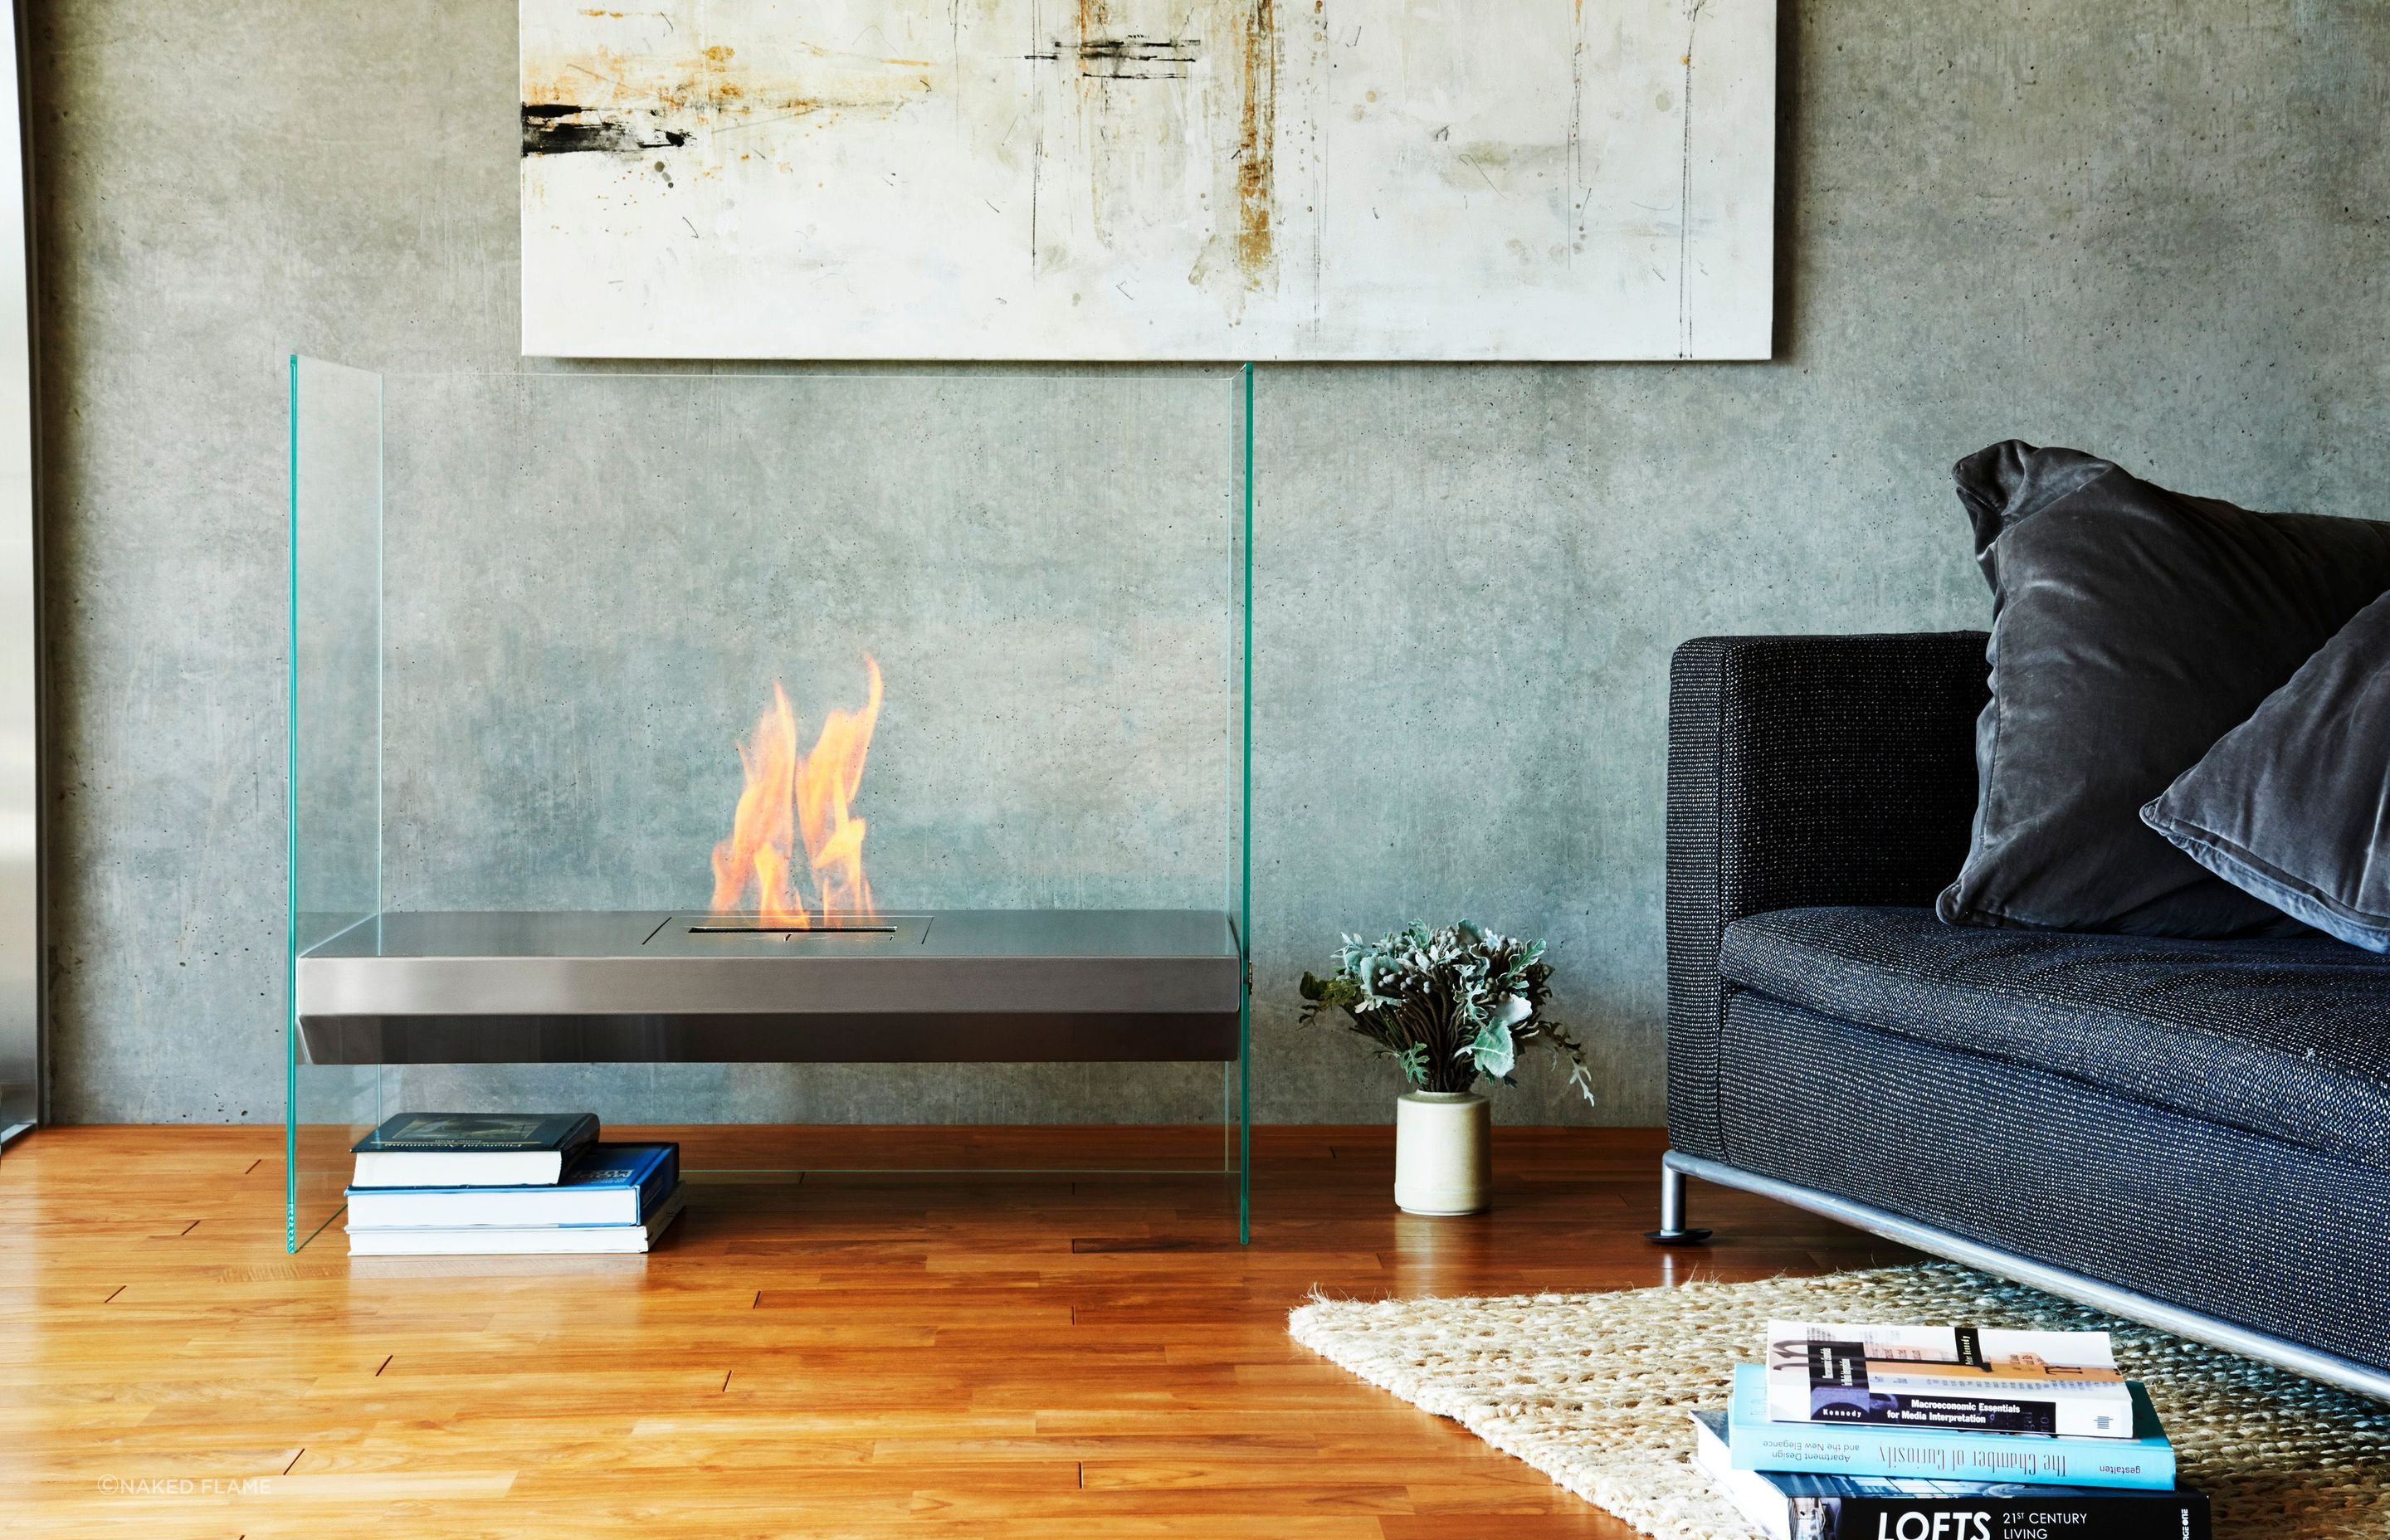 The sleek and modern EcoSmart Igloo BK5 Bioethanol Fireplace is a great fit for contemporary styling